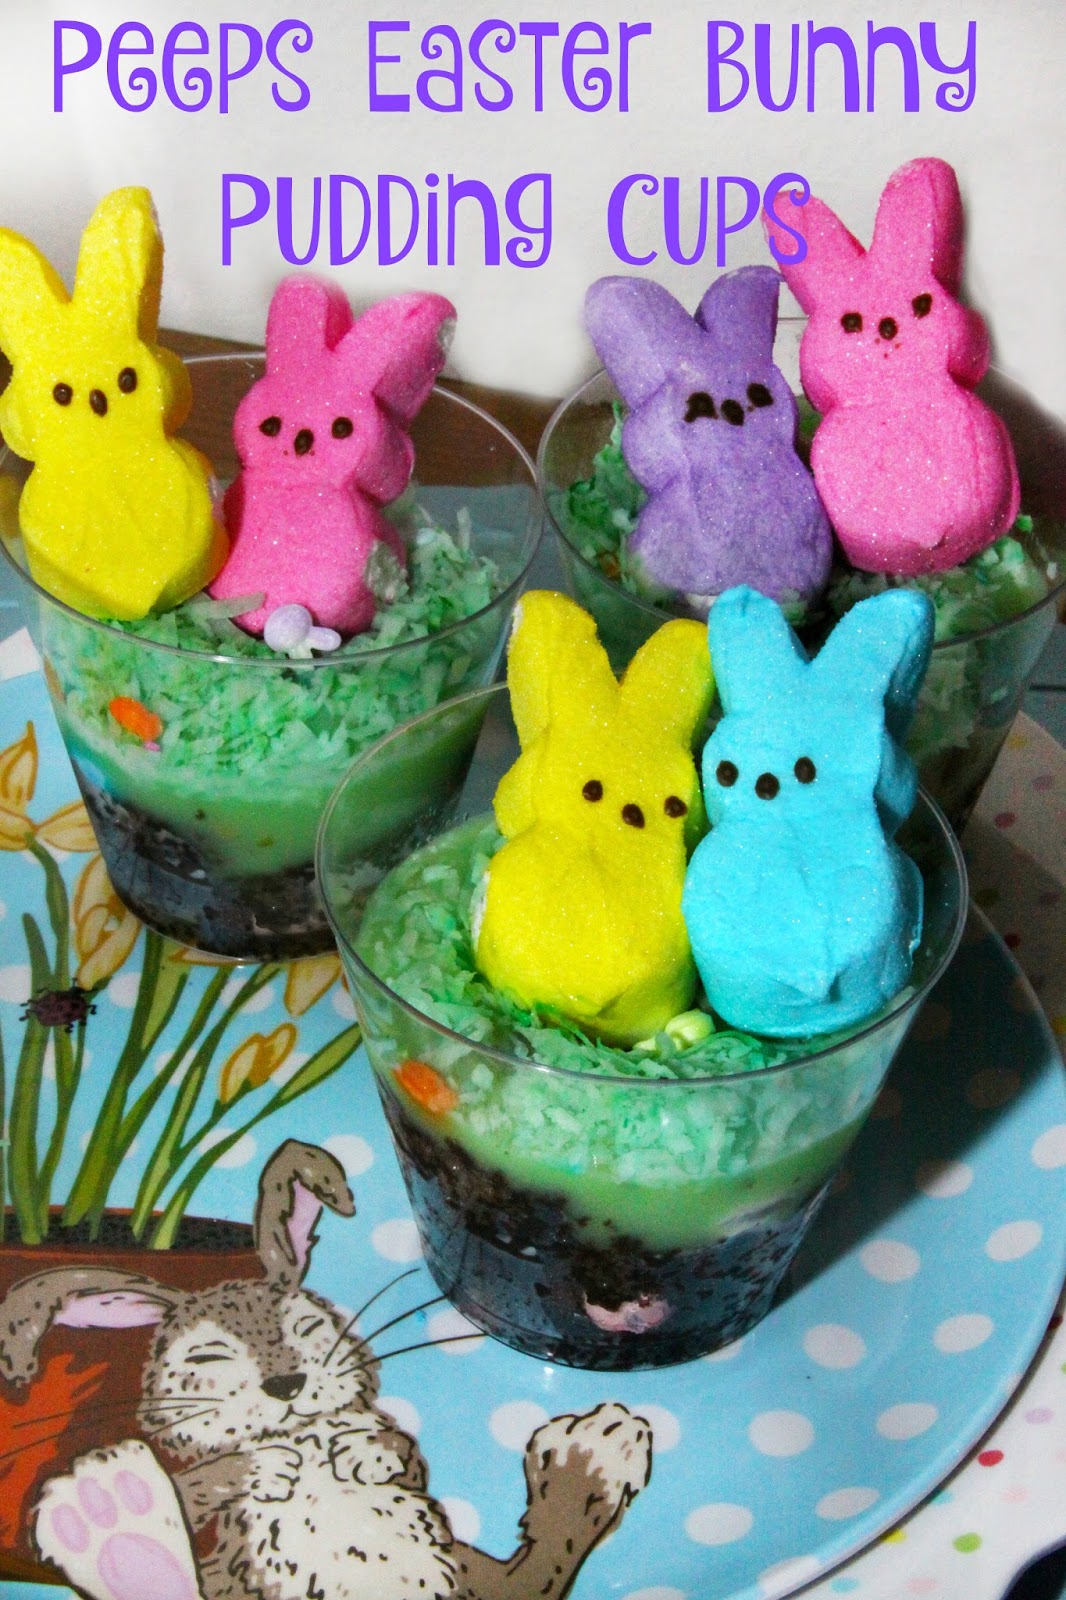 https://www.4theloveoffoodblog.com/wp-content/uploads/2017/04/peepspuddingcups.jpg